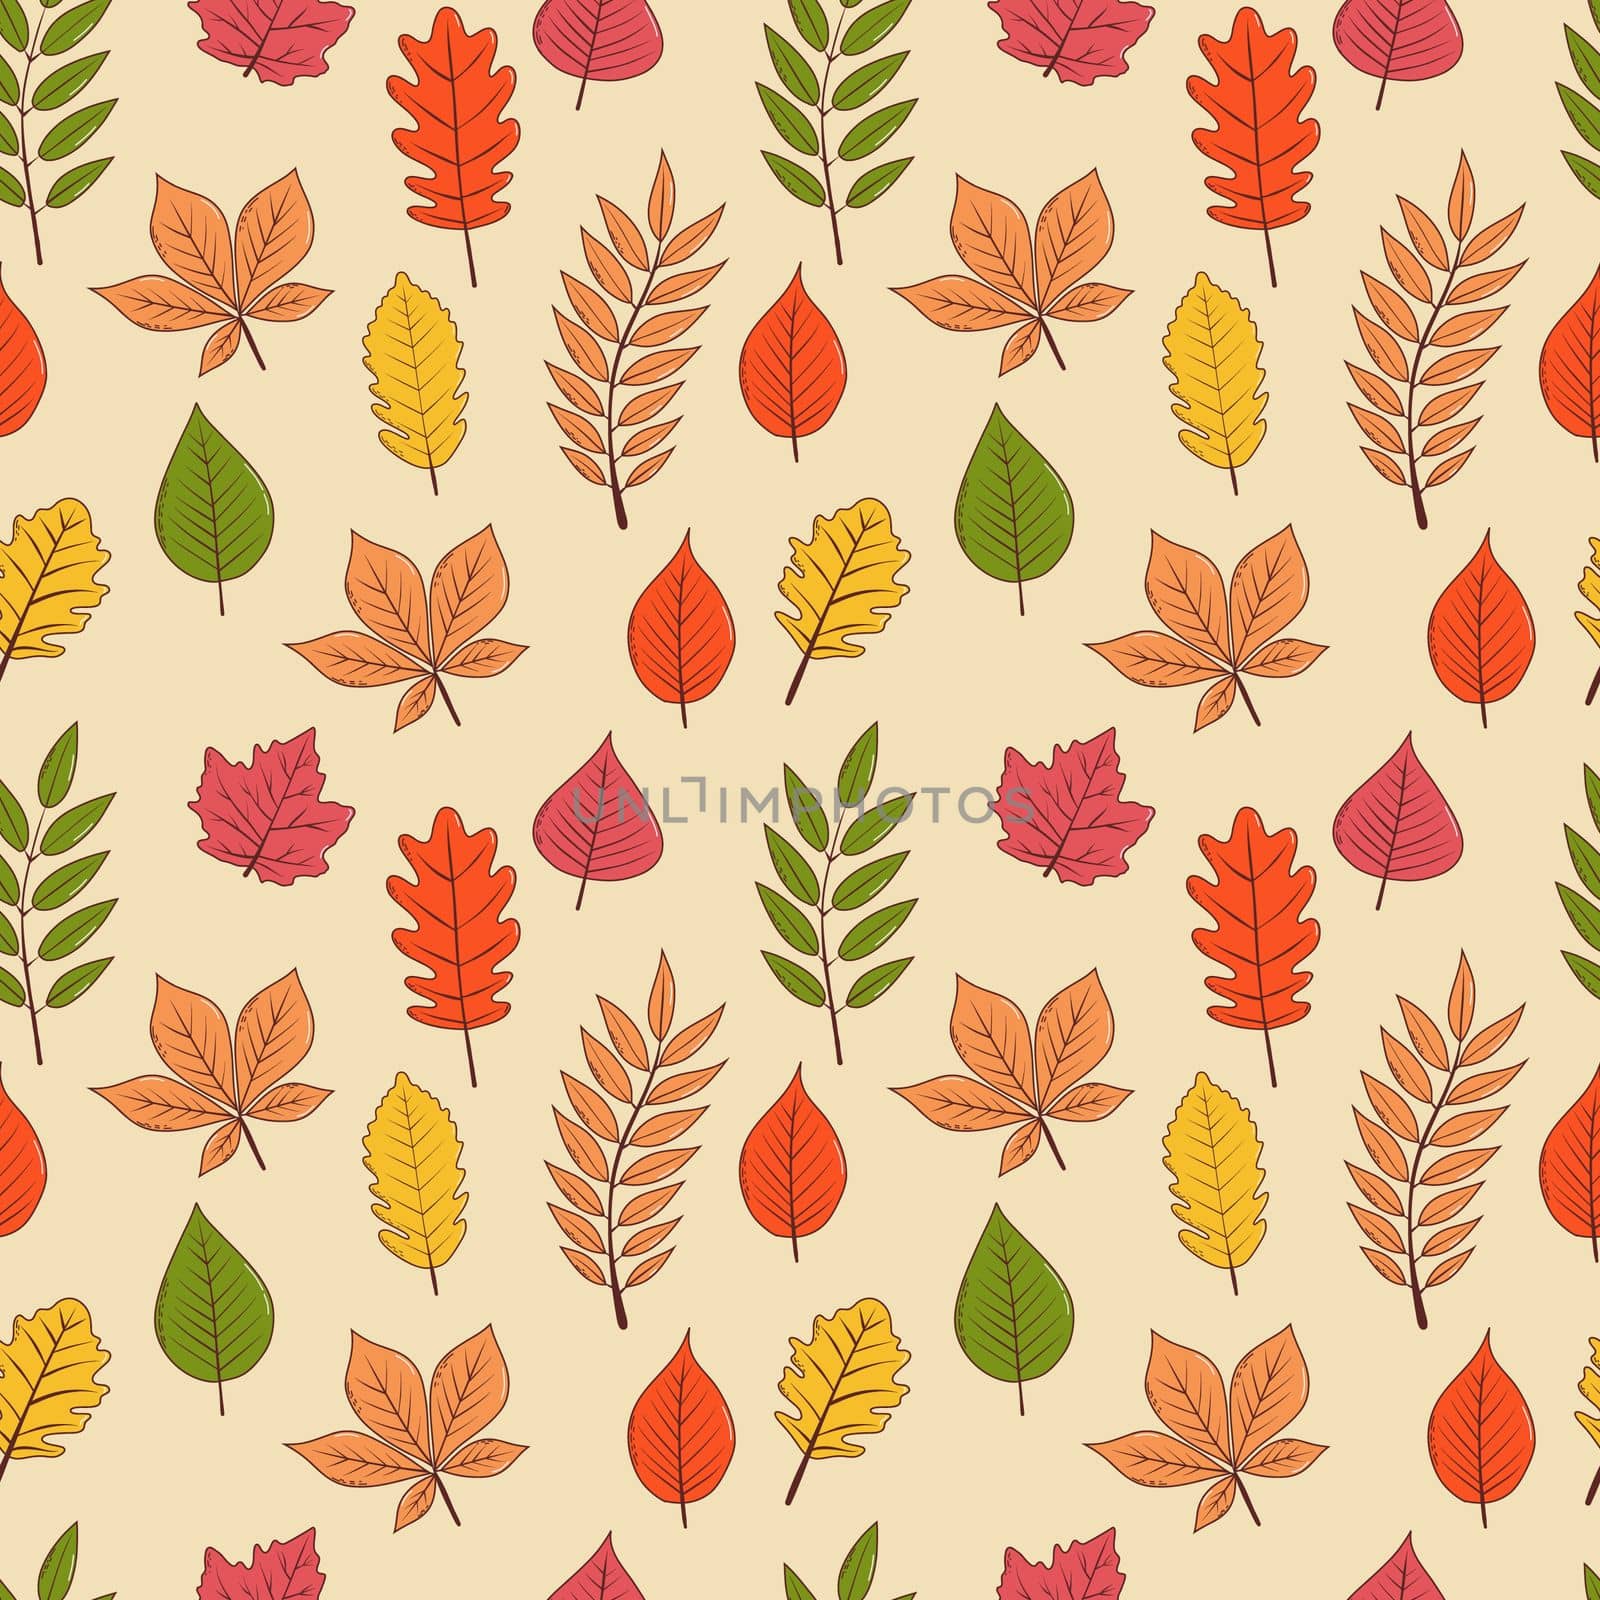 Autumn leaves seamless pattern. Vector illustration in hand drawn style.